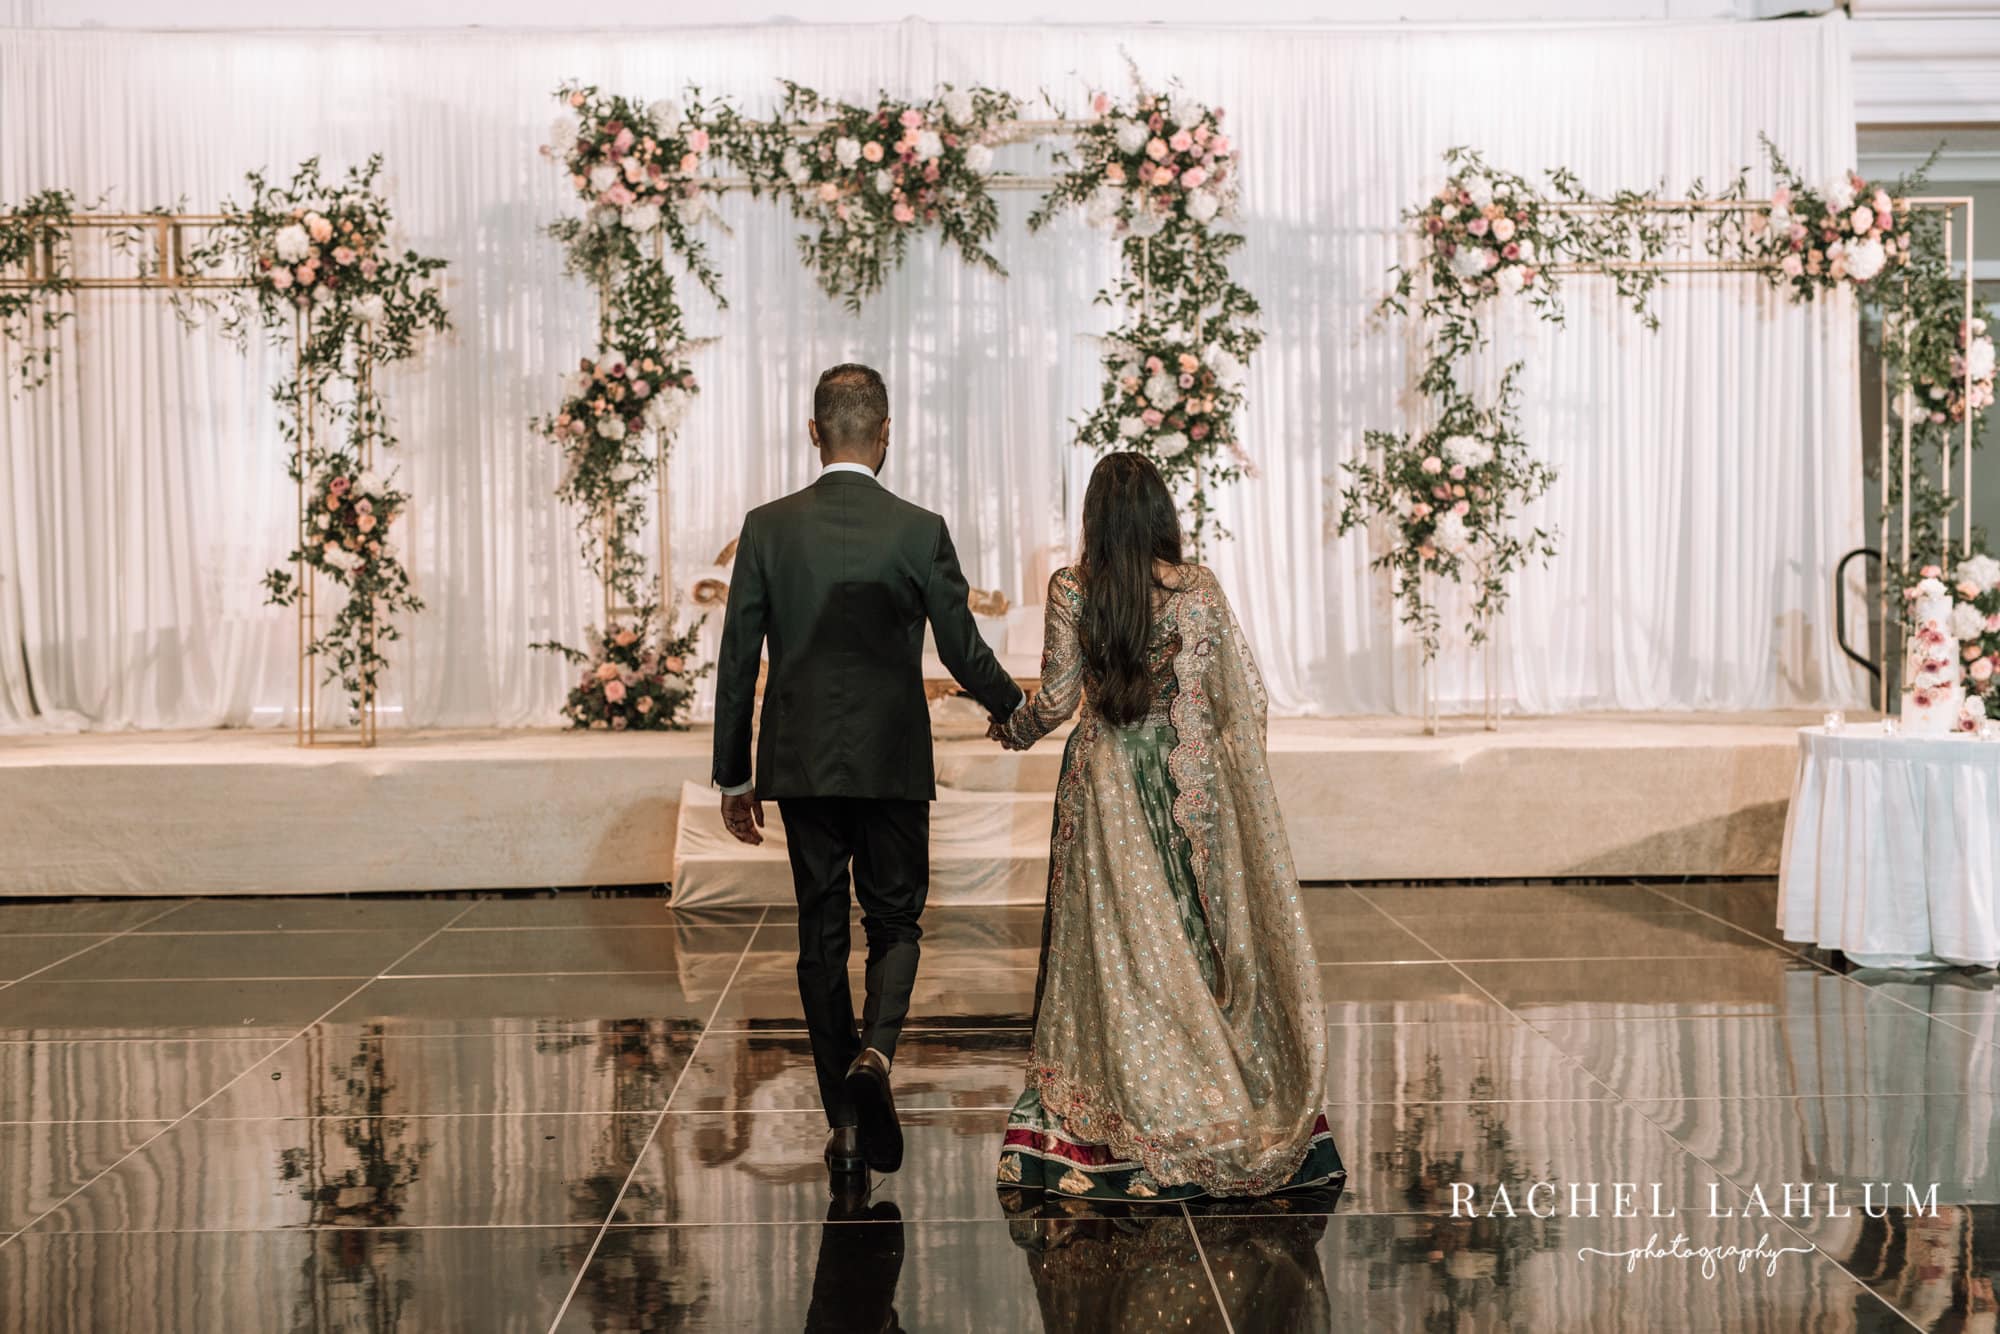 Bride and groom walk towards the stage for Walima celebration at the Intercontinental.